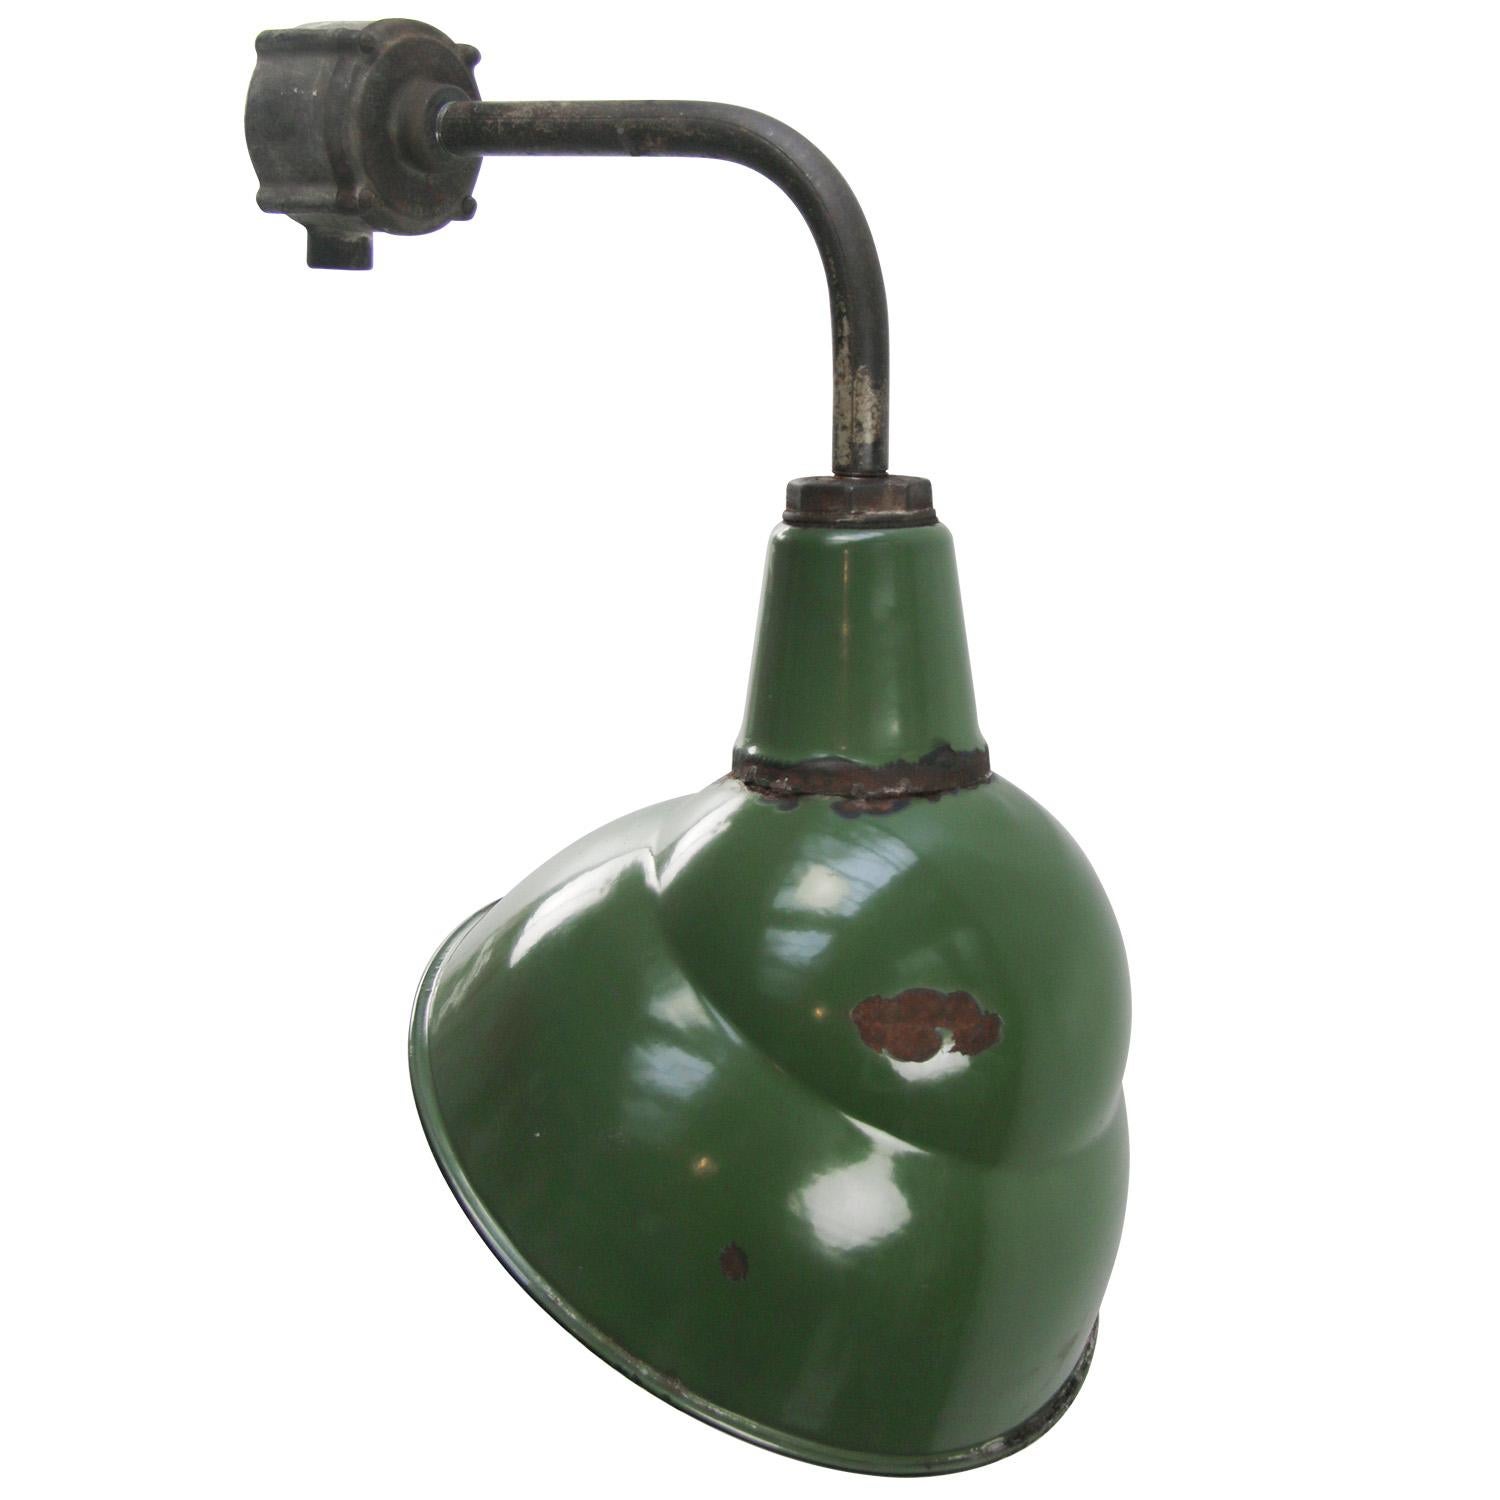 American factory wall light by Benjamin USA
Green enamel, white interior

diameter cast iron wall piece: 8 cm, 2 holes to secure

Weight: 3.20 kg / 7.1 lb

Priced per individual item. All lamps have been made suitable by international